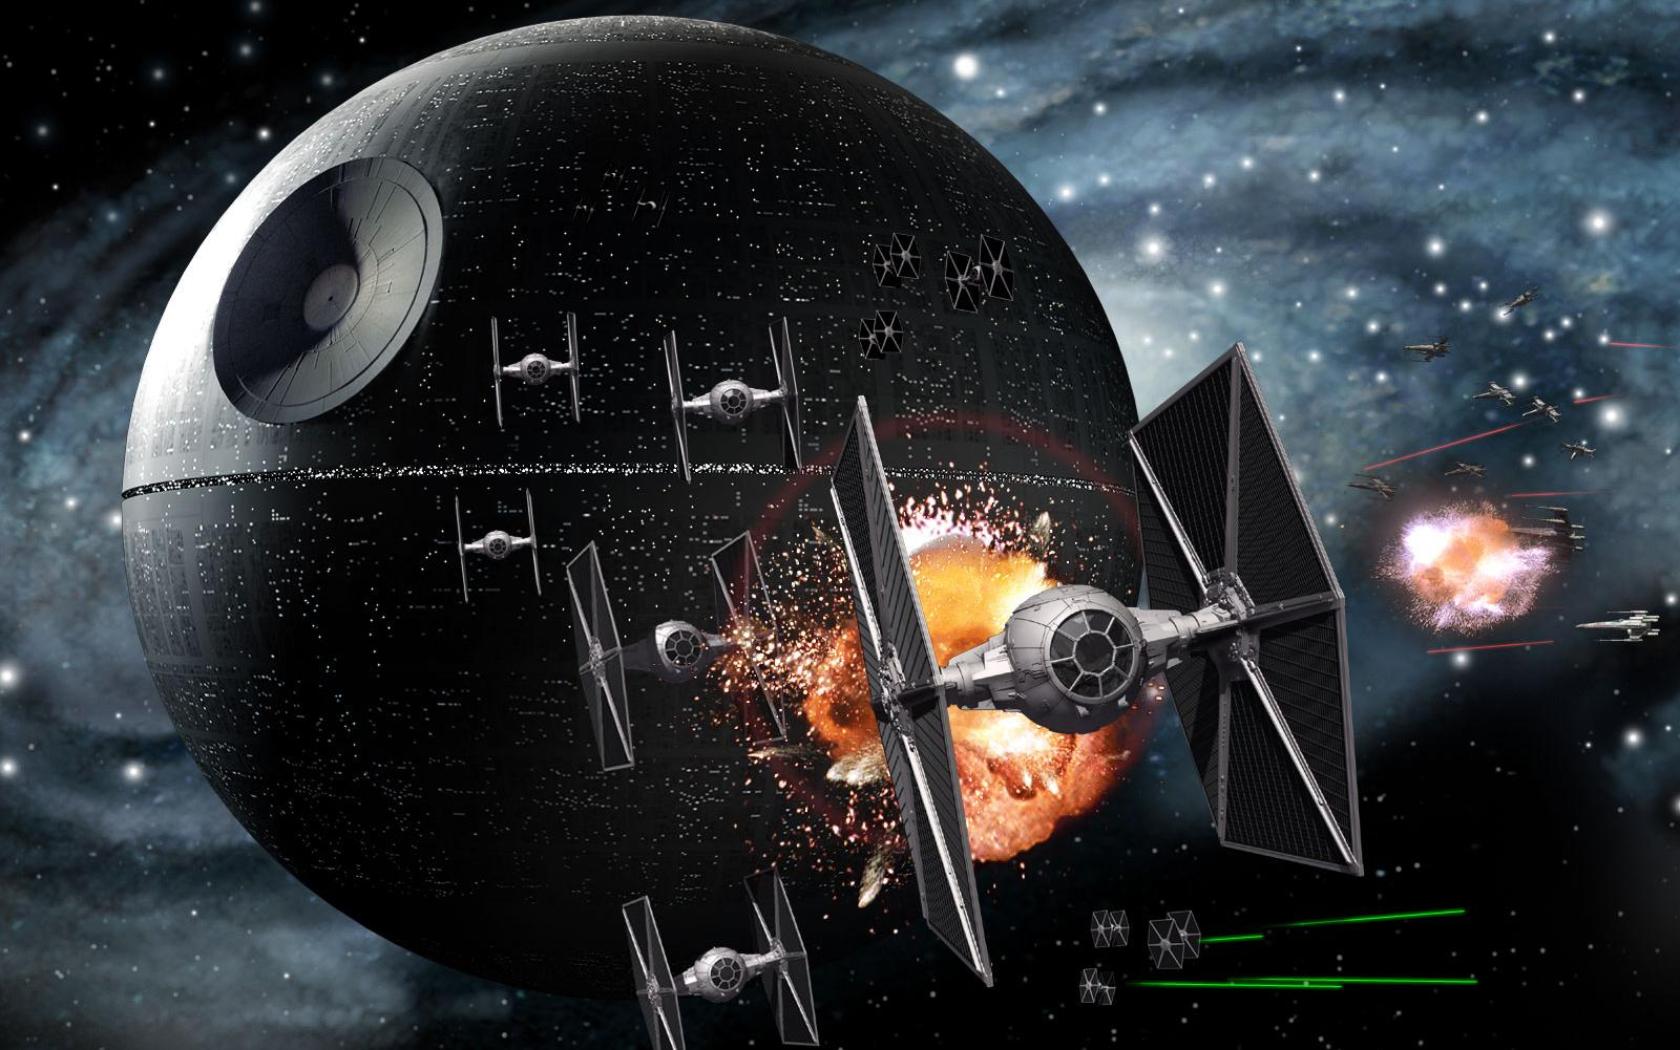 Is This The New TIE Fighter From Star Wars The Force Awakens